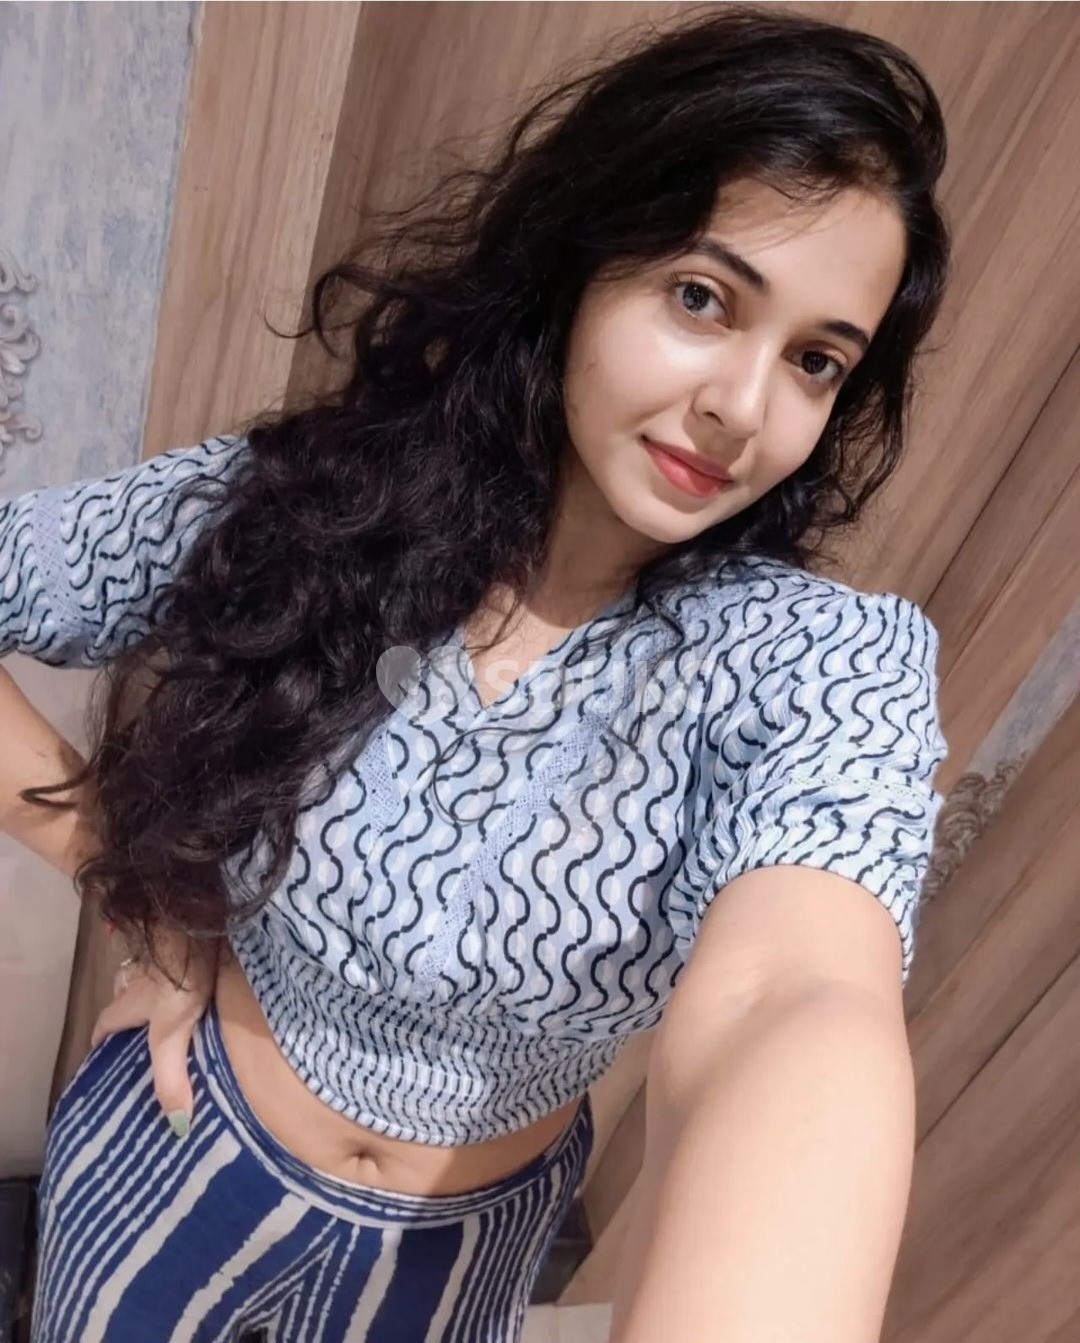 Kanpur ✅ road 24x7 AFFORDABLE CHEAPEST RATE SAFE CALL GIRL SERVICE AVAILABLE OUTCALL AVAILABLE.. .